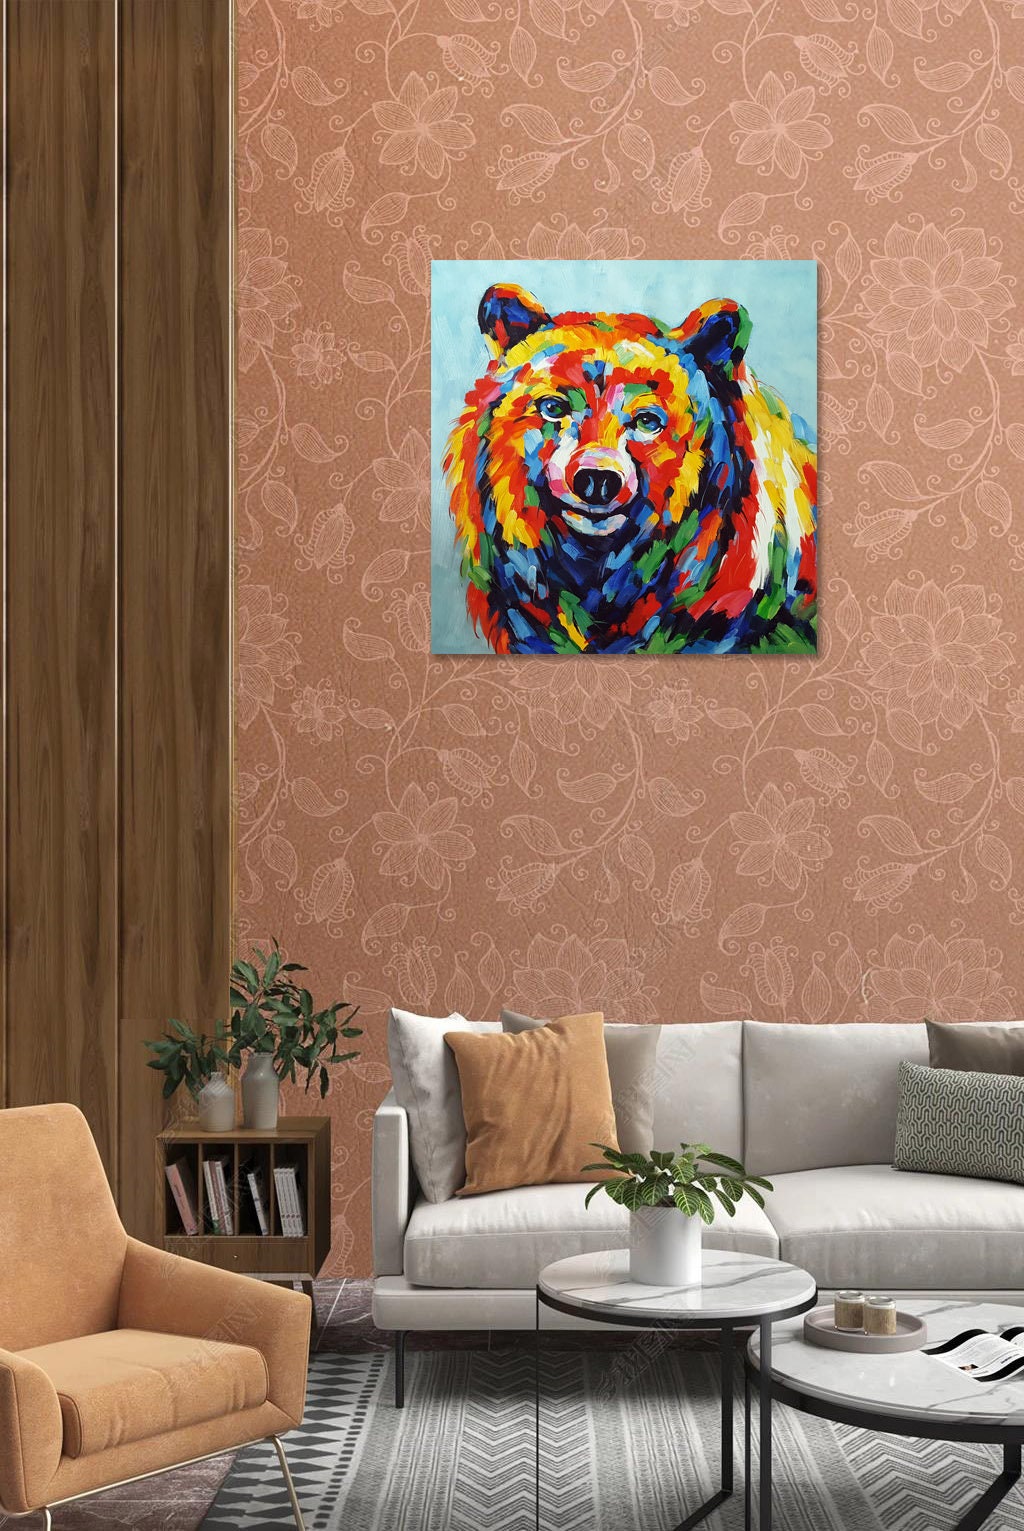 Original Hand Painted Bear Painting on Canvas Modern - Etsy